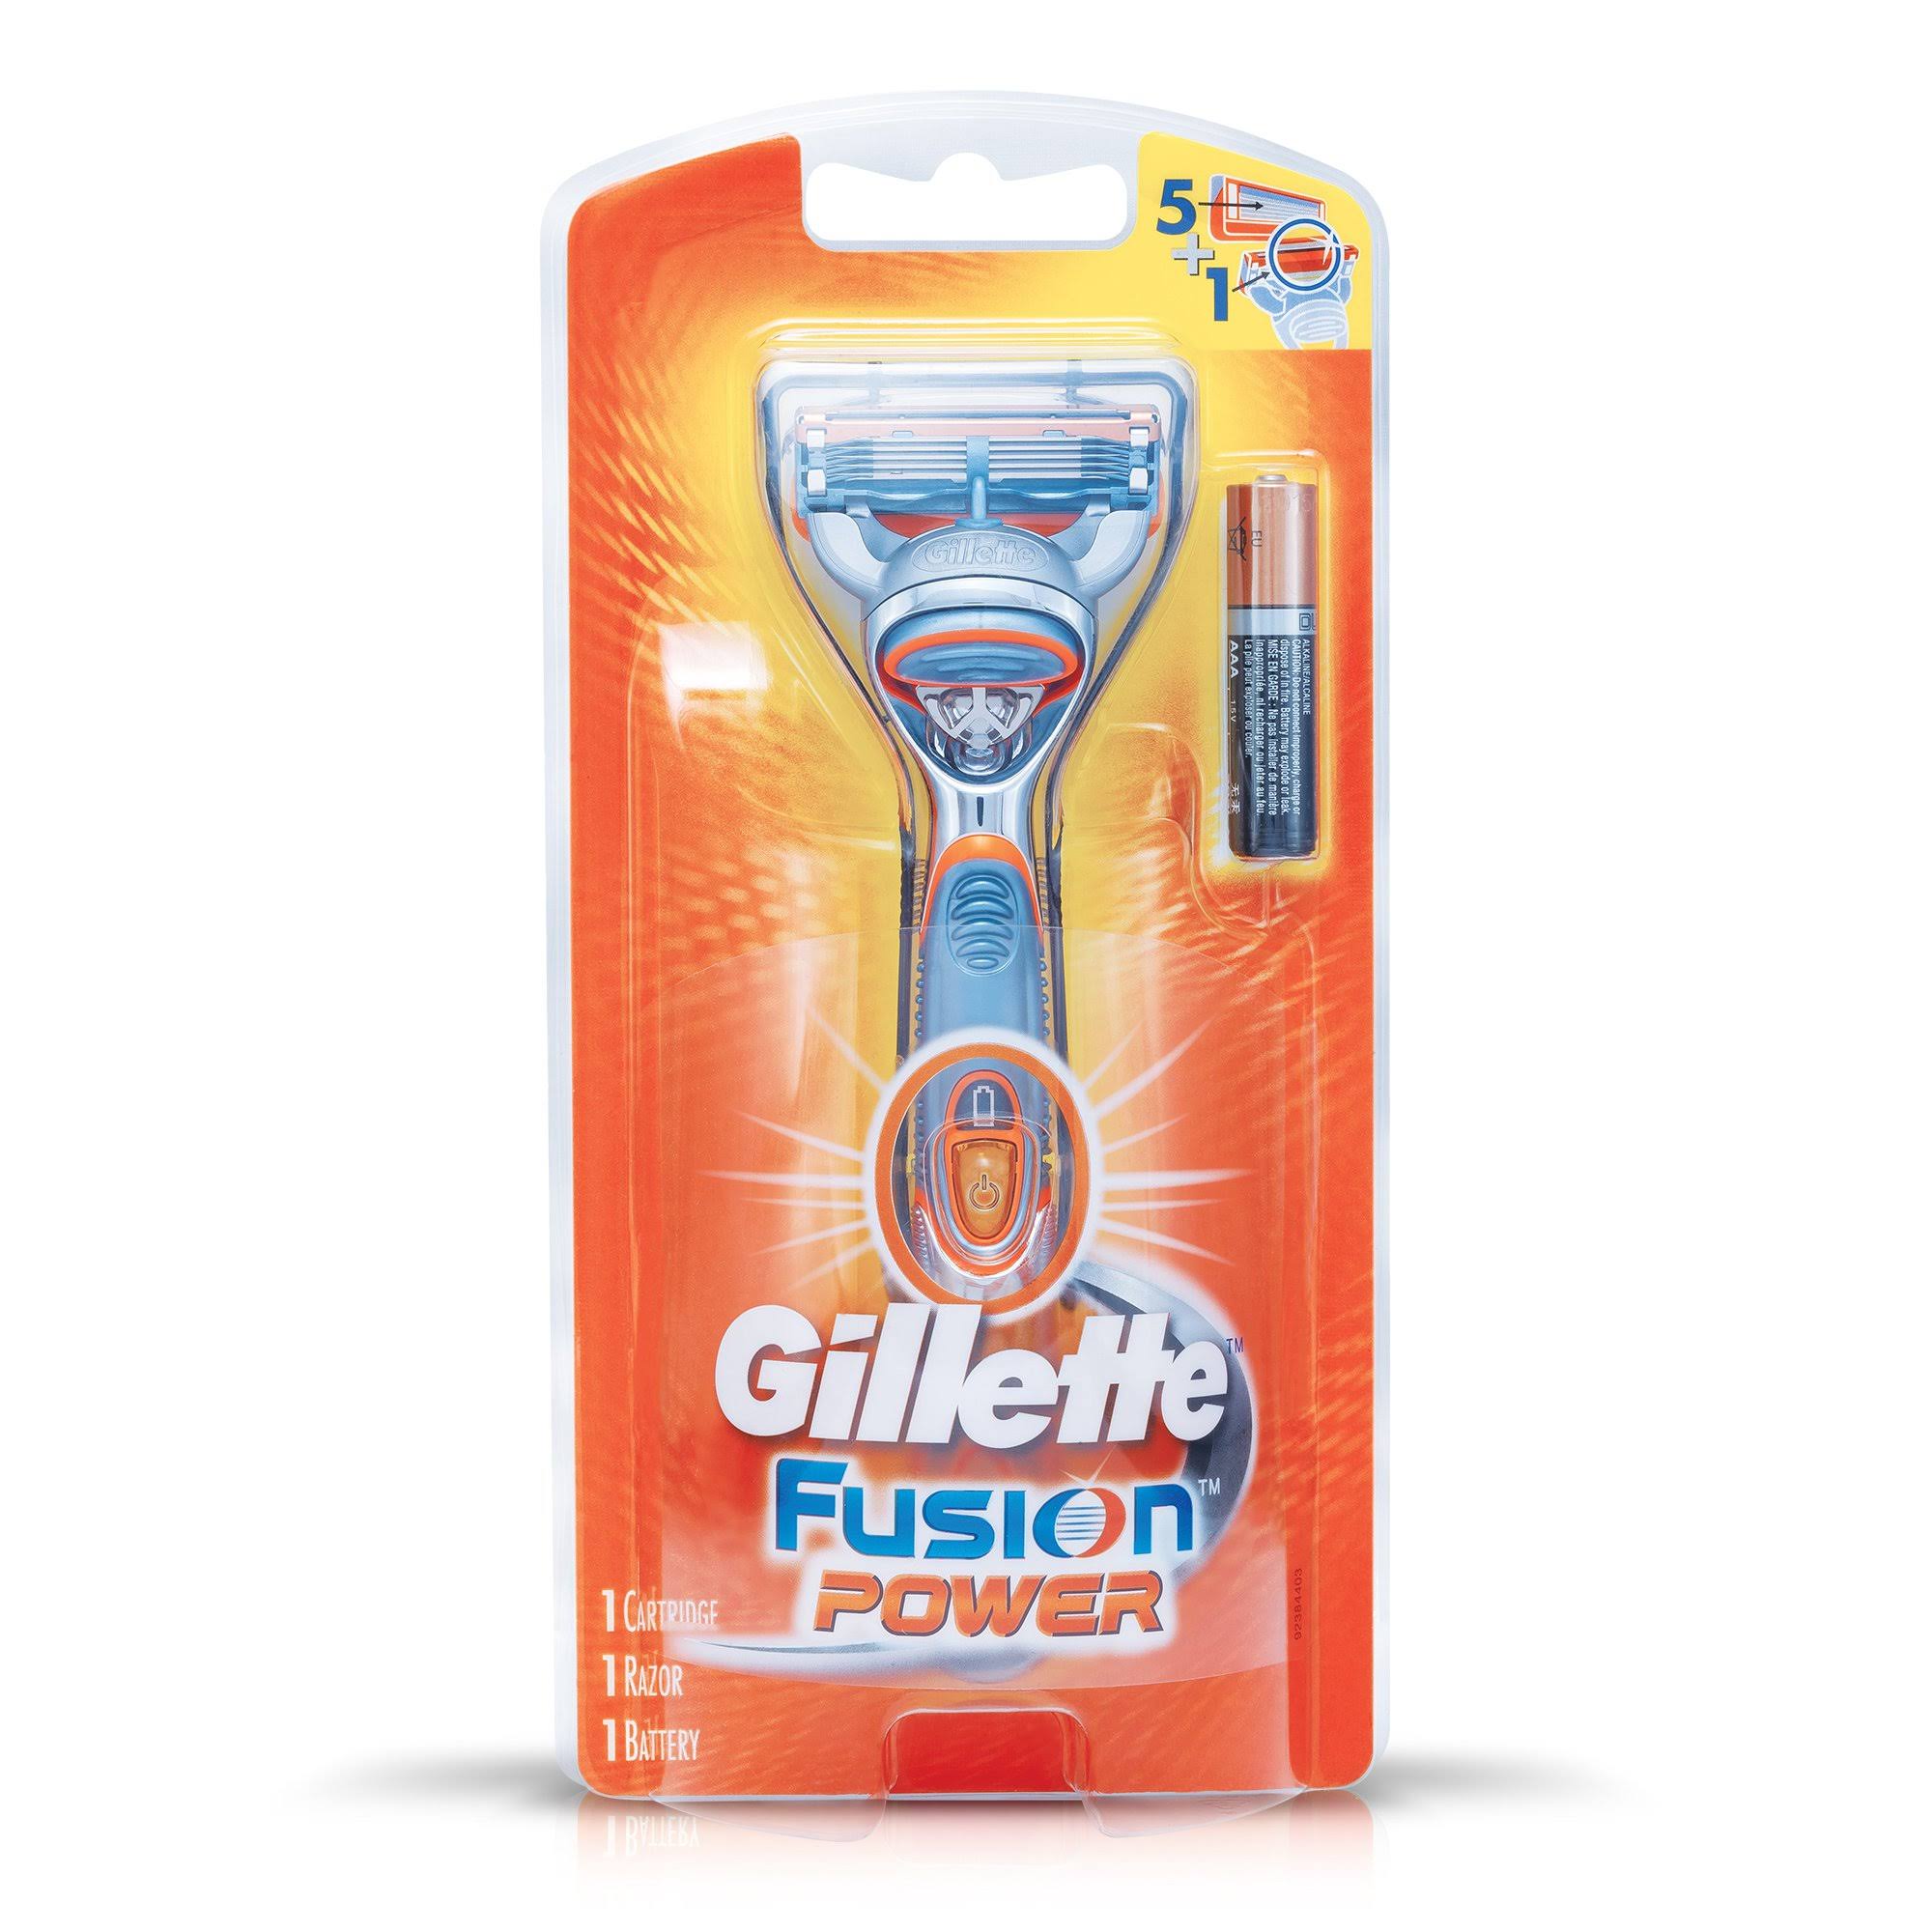 Gillette Fusion Power Razor with Battery